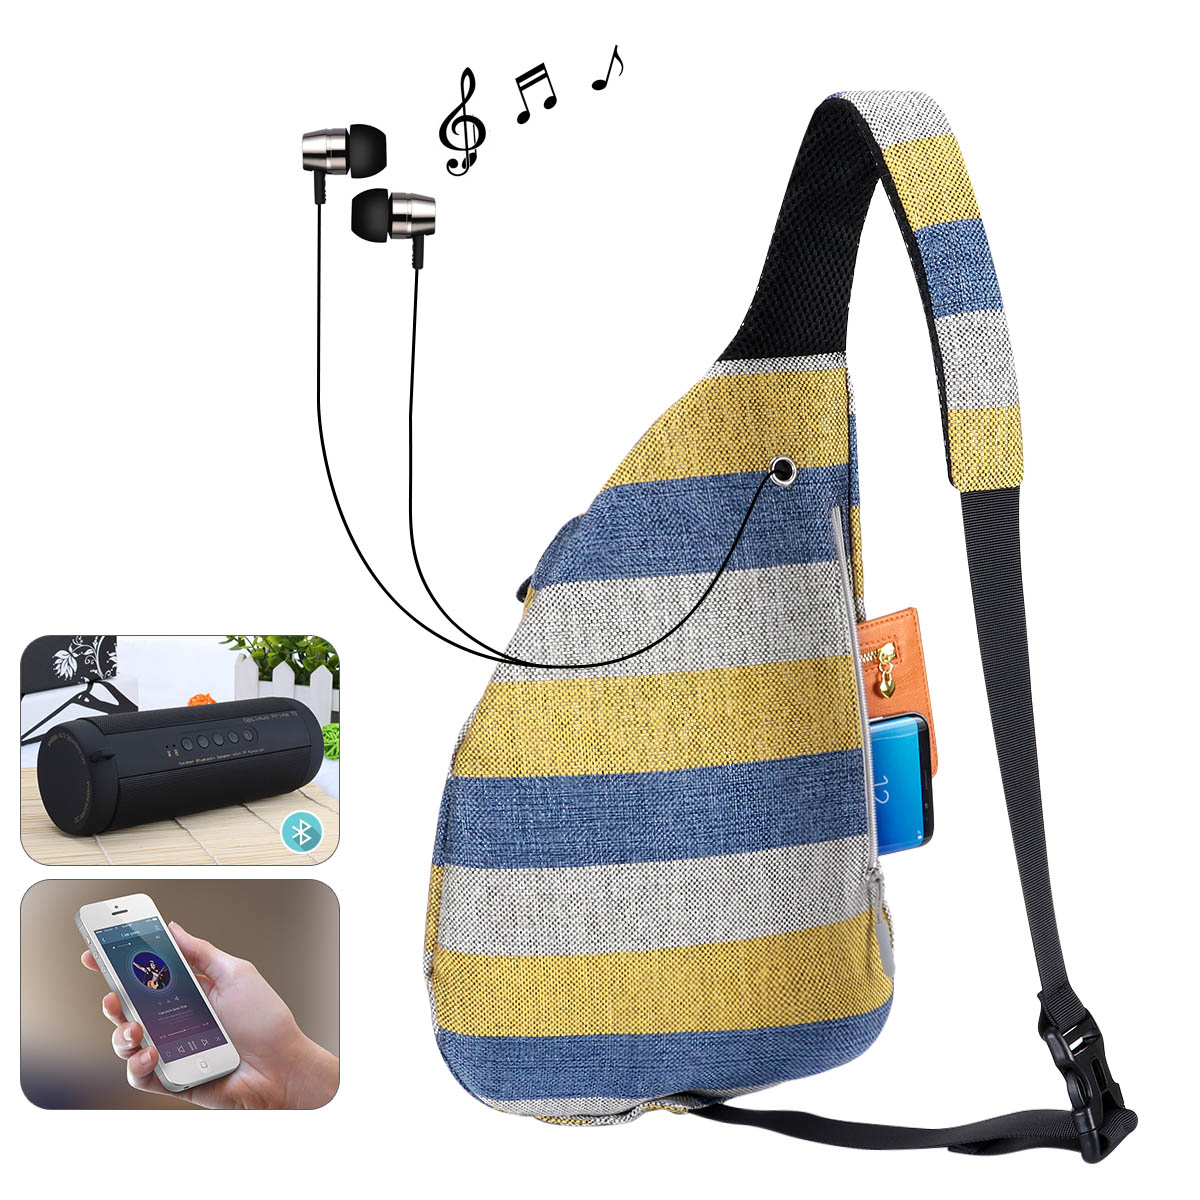 HAWEE Chest Daypack Hiking Backpack Sling Bag Sports Shoulder Travel Crossbody Daypack for Women, Wide Stripes of Yellow/ Blue/Gray - image 2 of 7